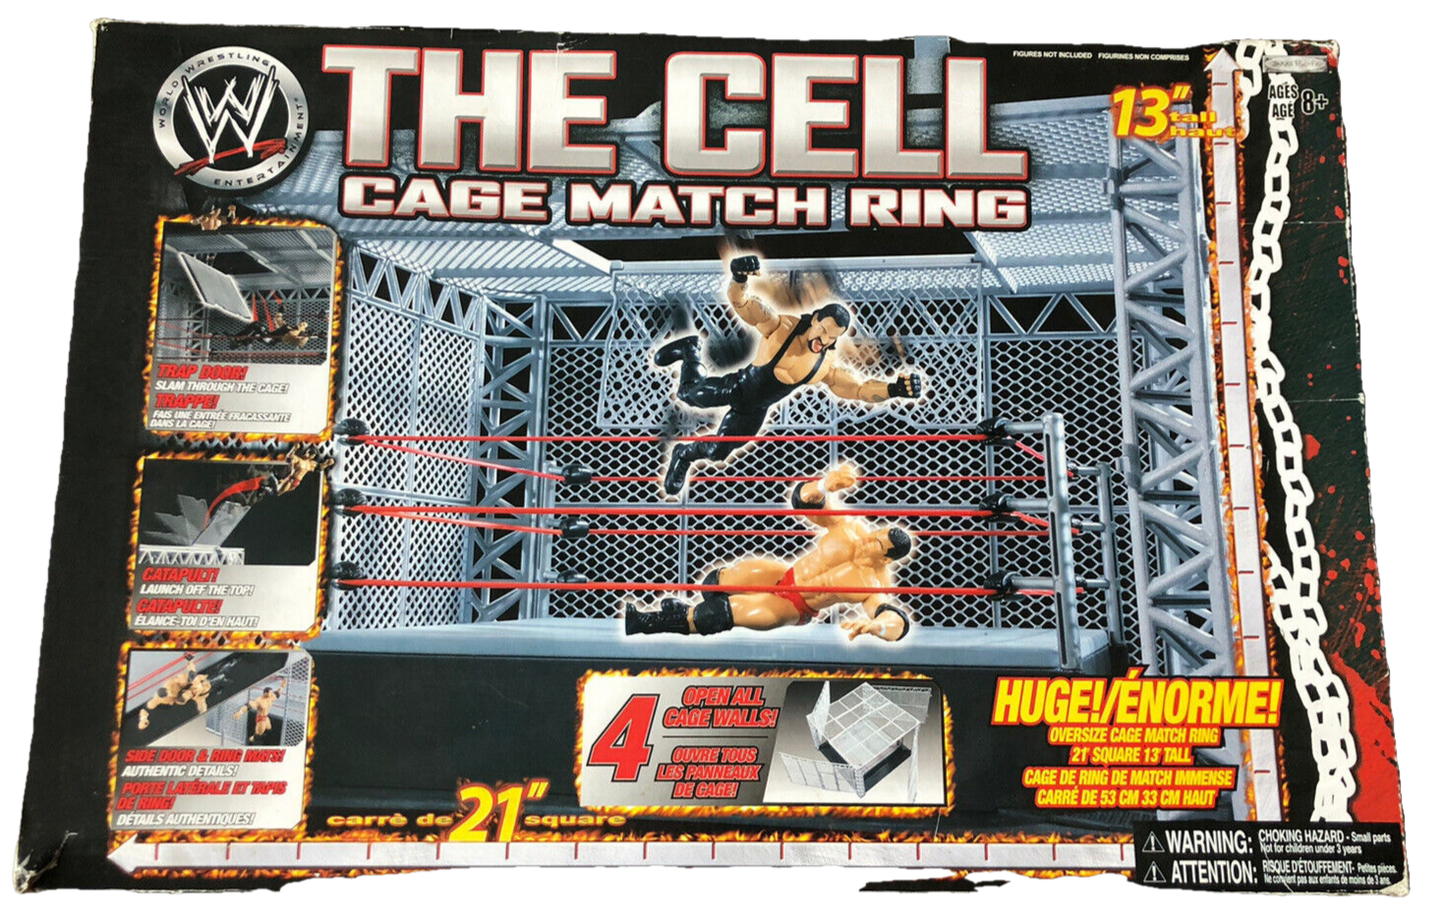 2009 WWE Jakks Pacific The Cell: Cage Match Ring